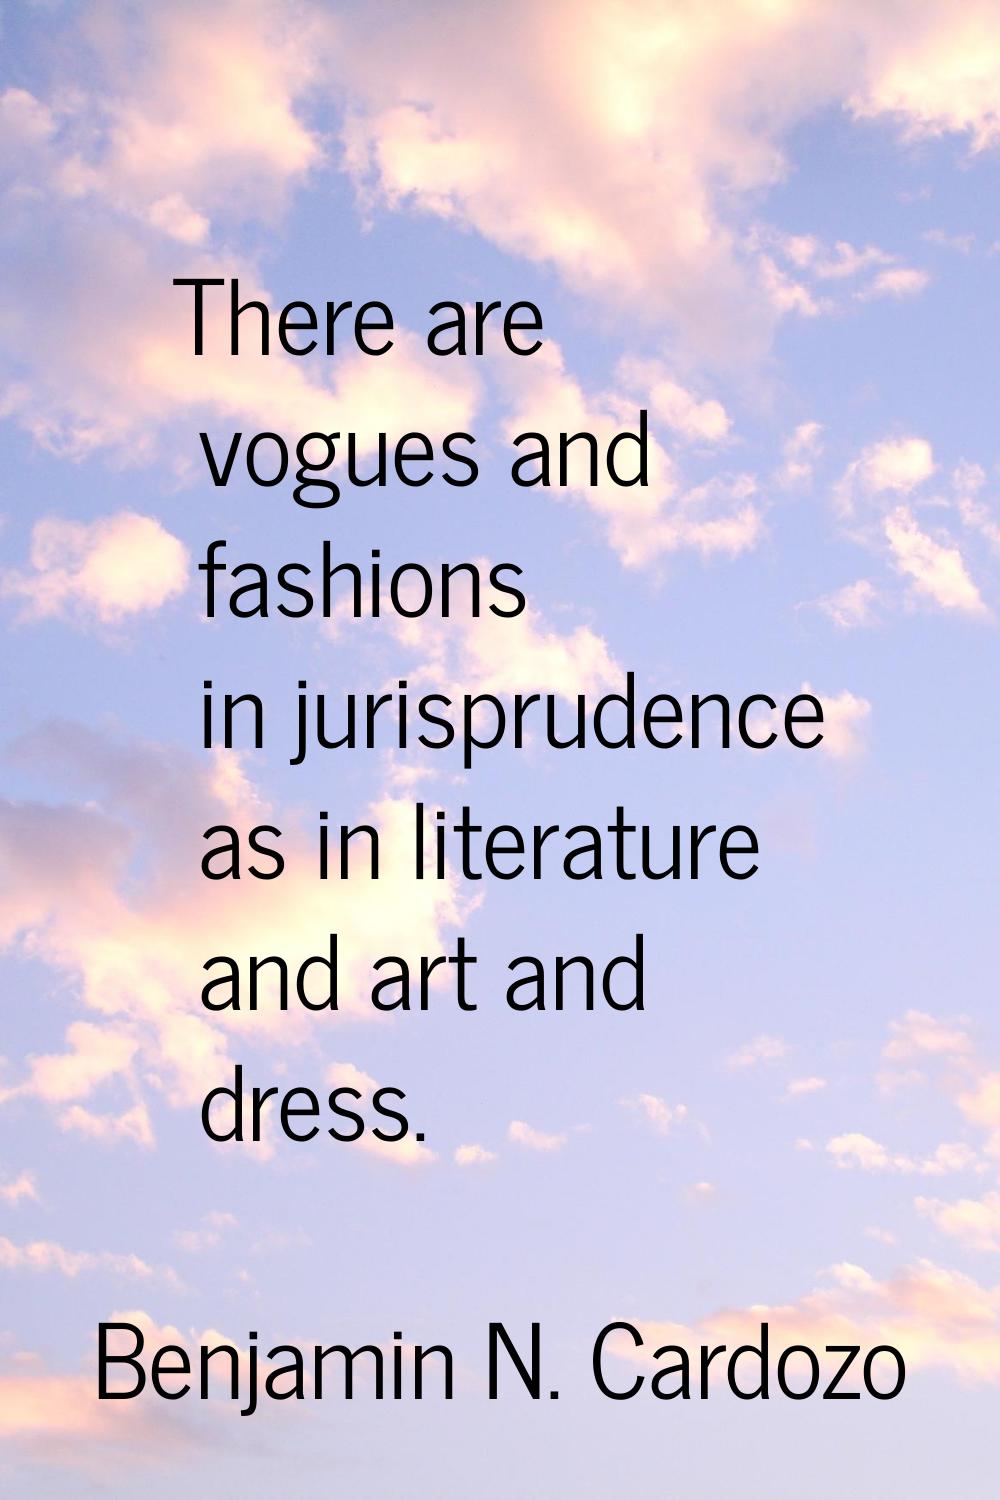 There are vogues and fashions in jurisprudence as in literature and art and dress.